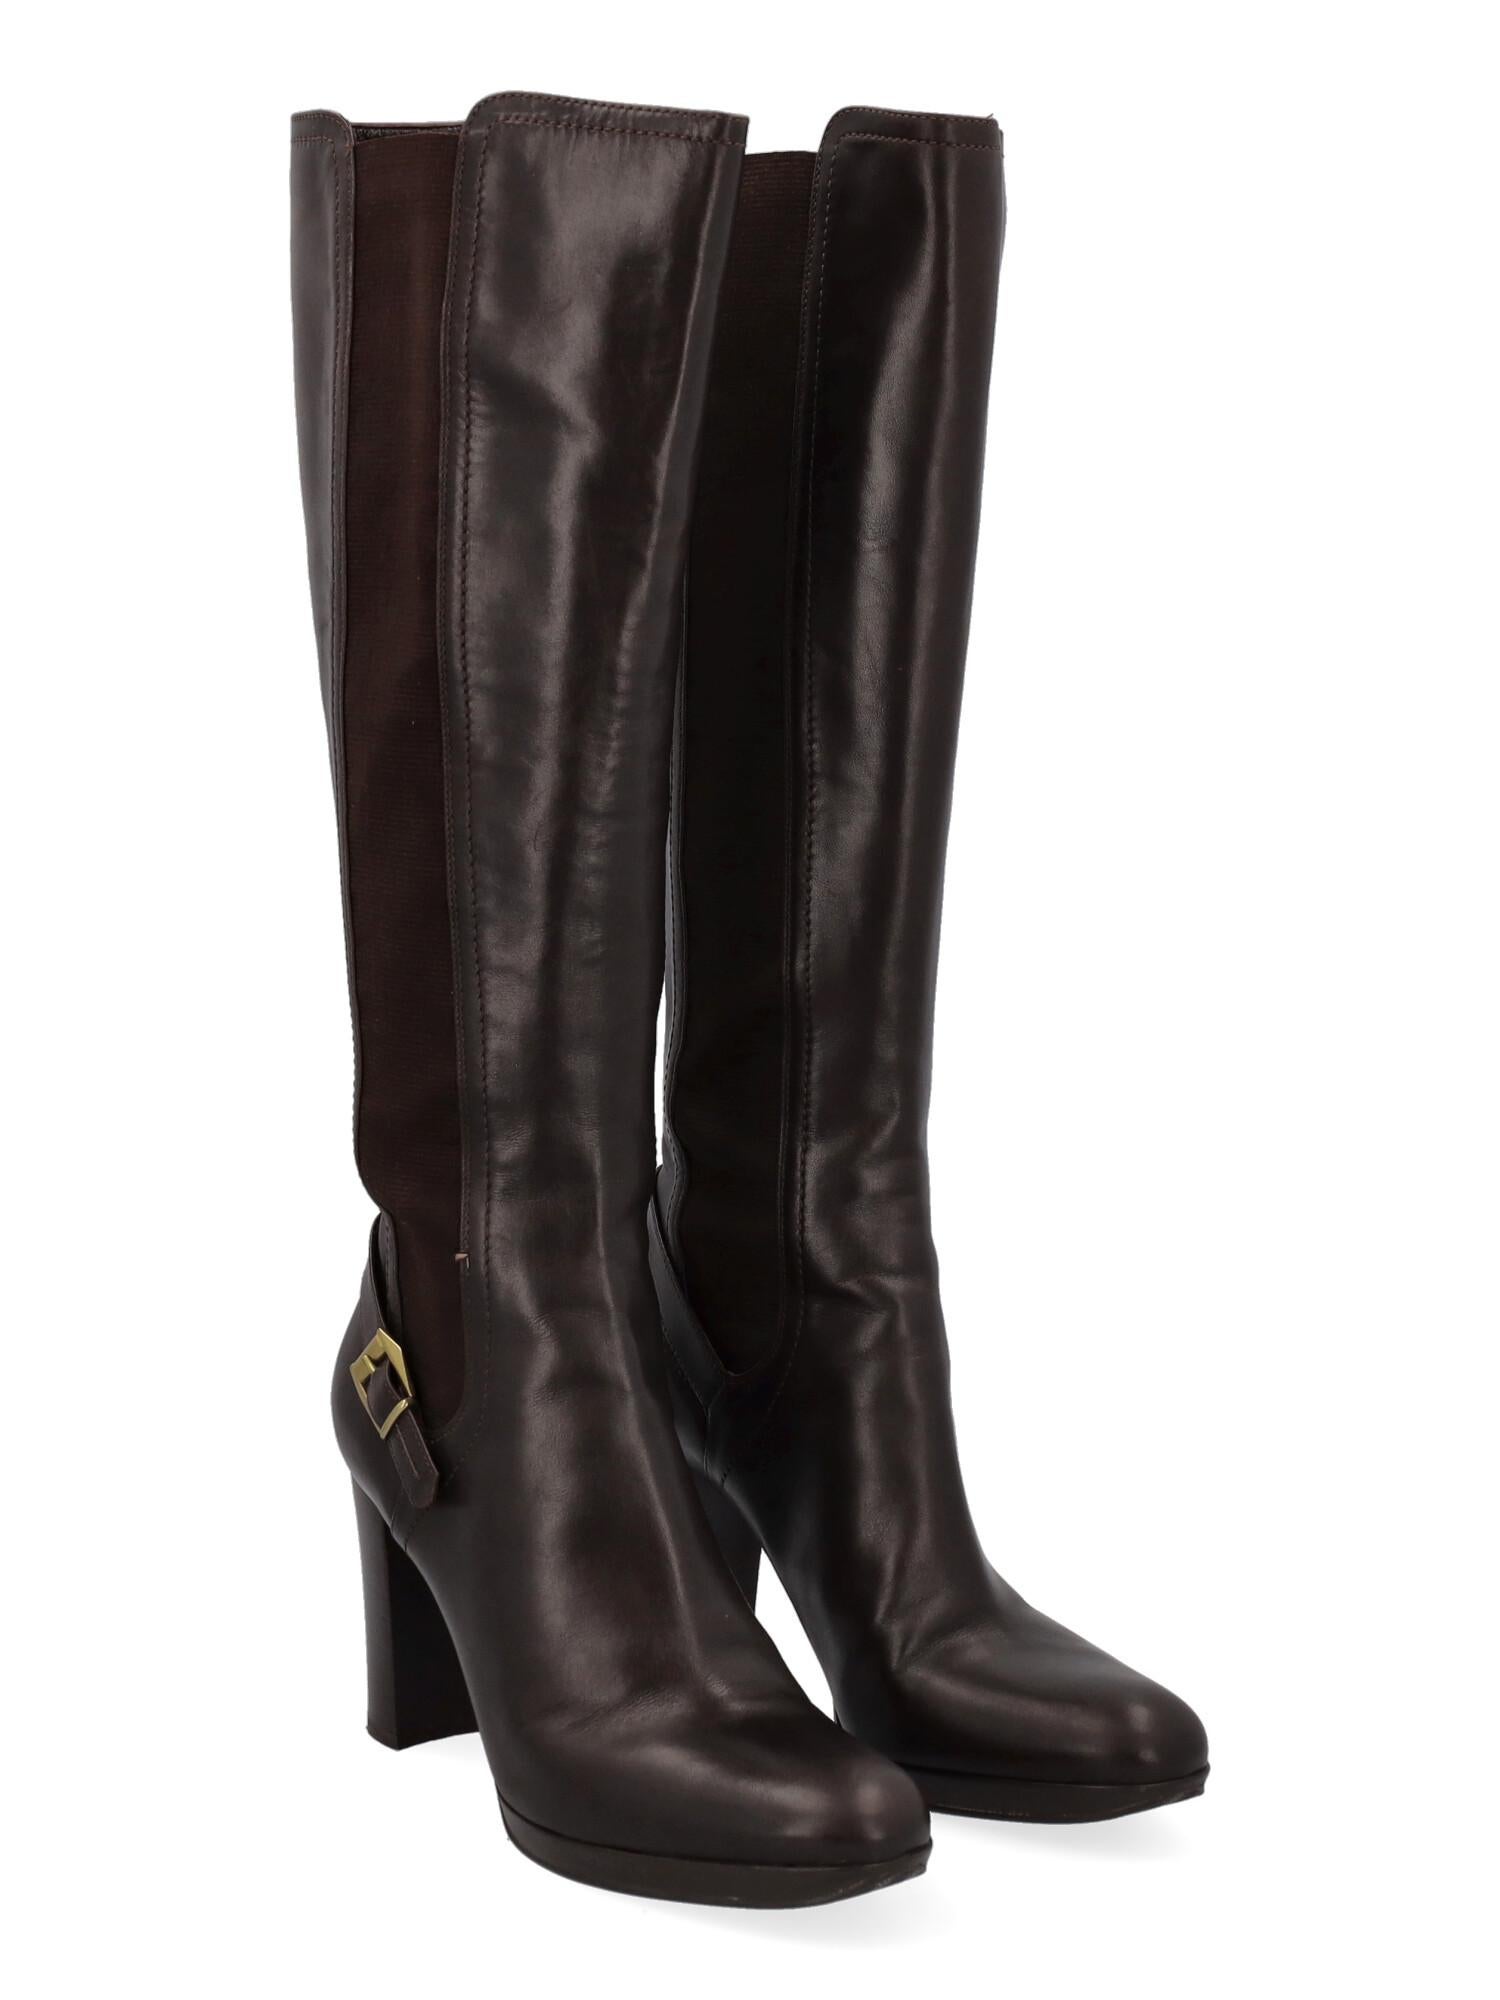 Product Description: Boots, leather, solid color, knee-length, gold-tone hardware, round toe, branded insole, block heel, high heel

Includes: N/A

Product Condition: Very Good
Heel: visible marks. Upper: visible wrinkle.

Measurements: 
Height: 10